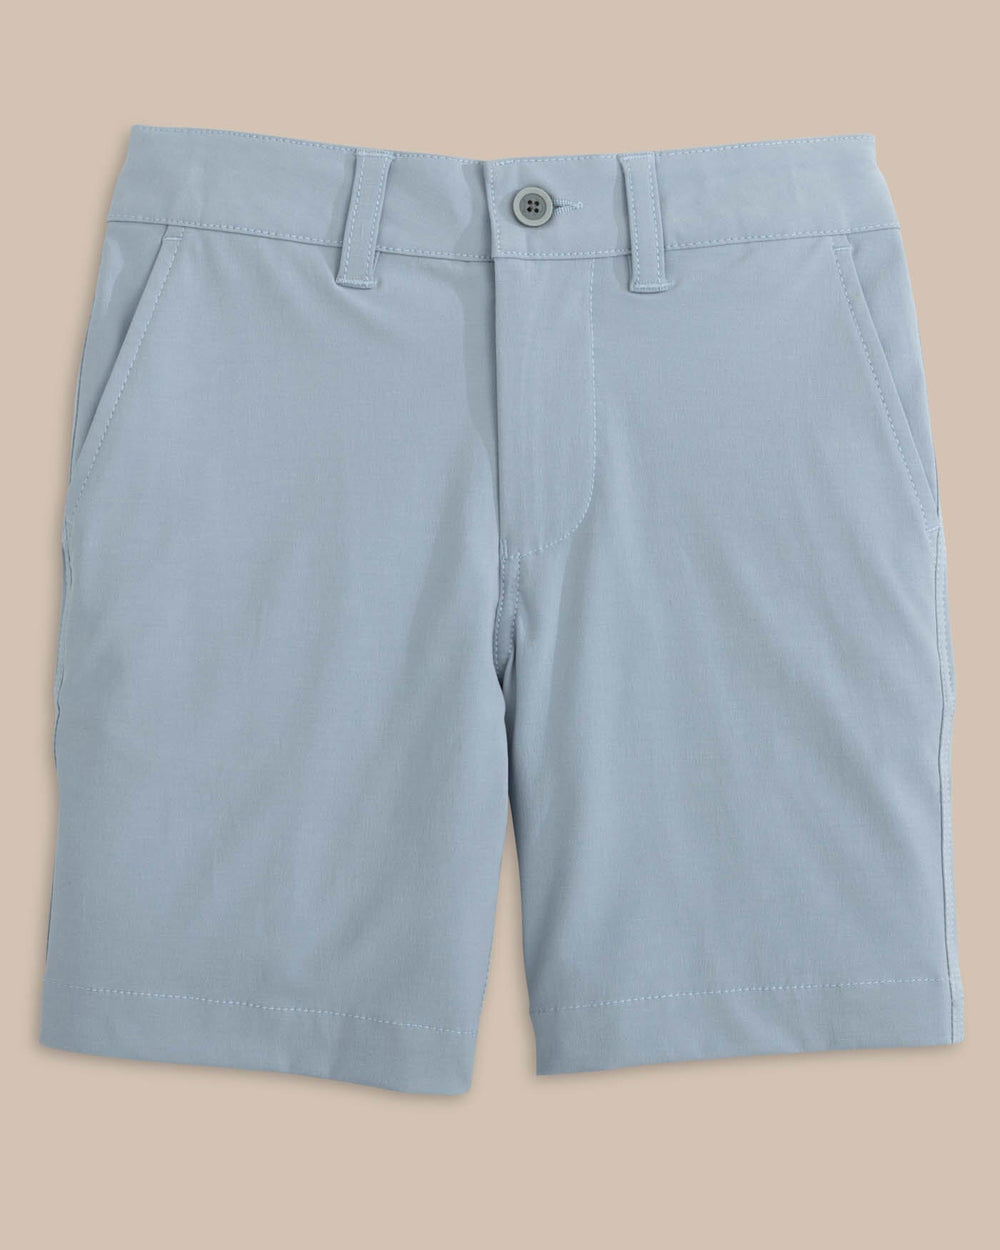 The front view of the Southern Tide Boys T3 Gulf Short by Southern Tide - Tsunami Grey